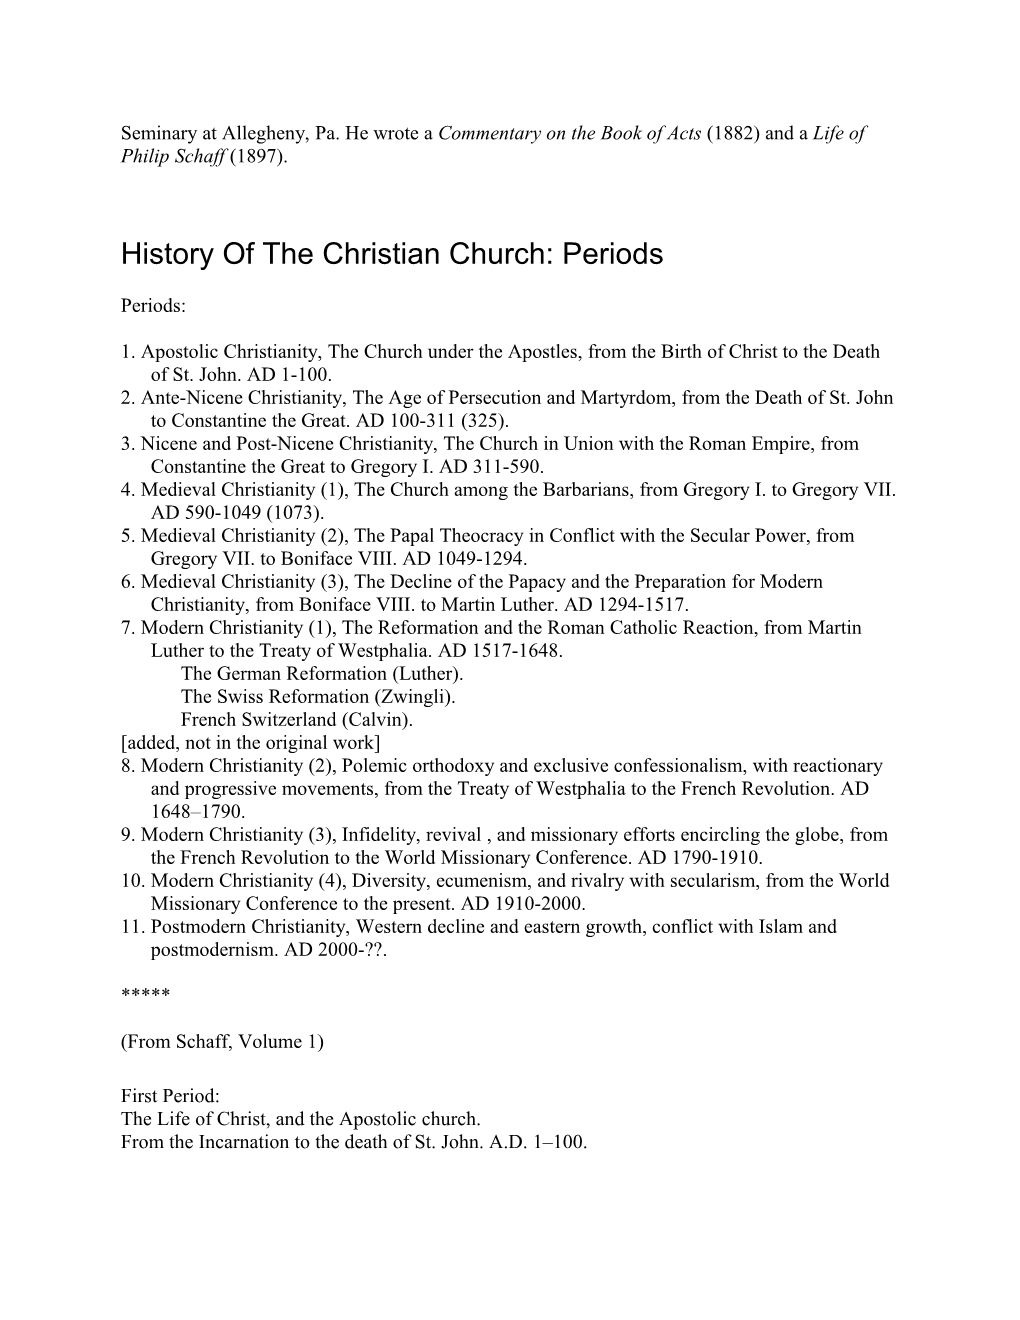 History of the Christian Church (1882)